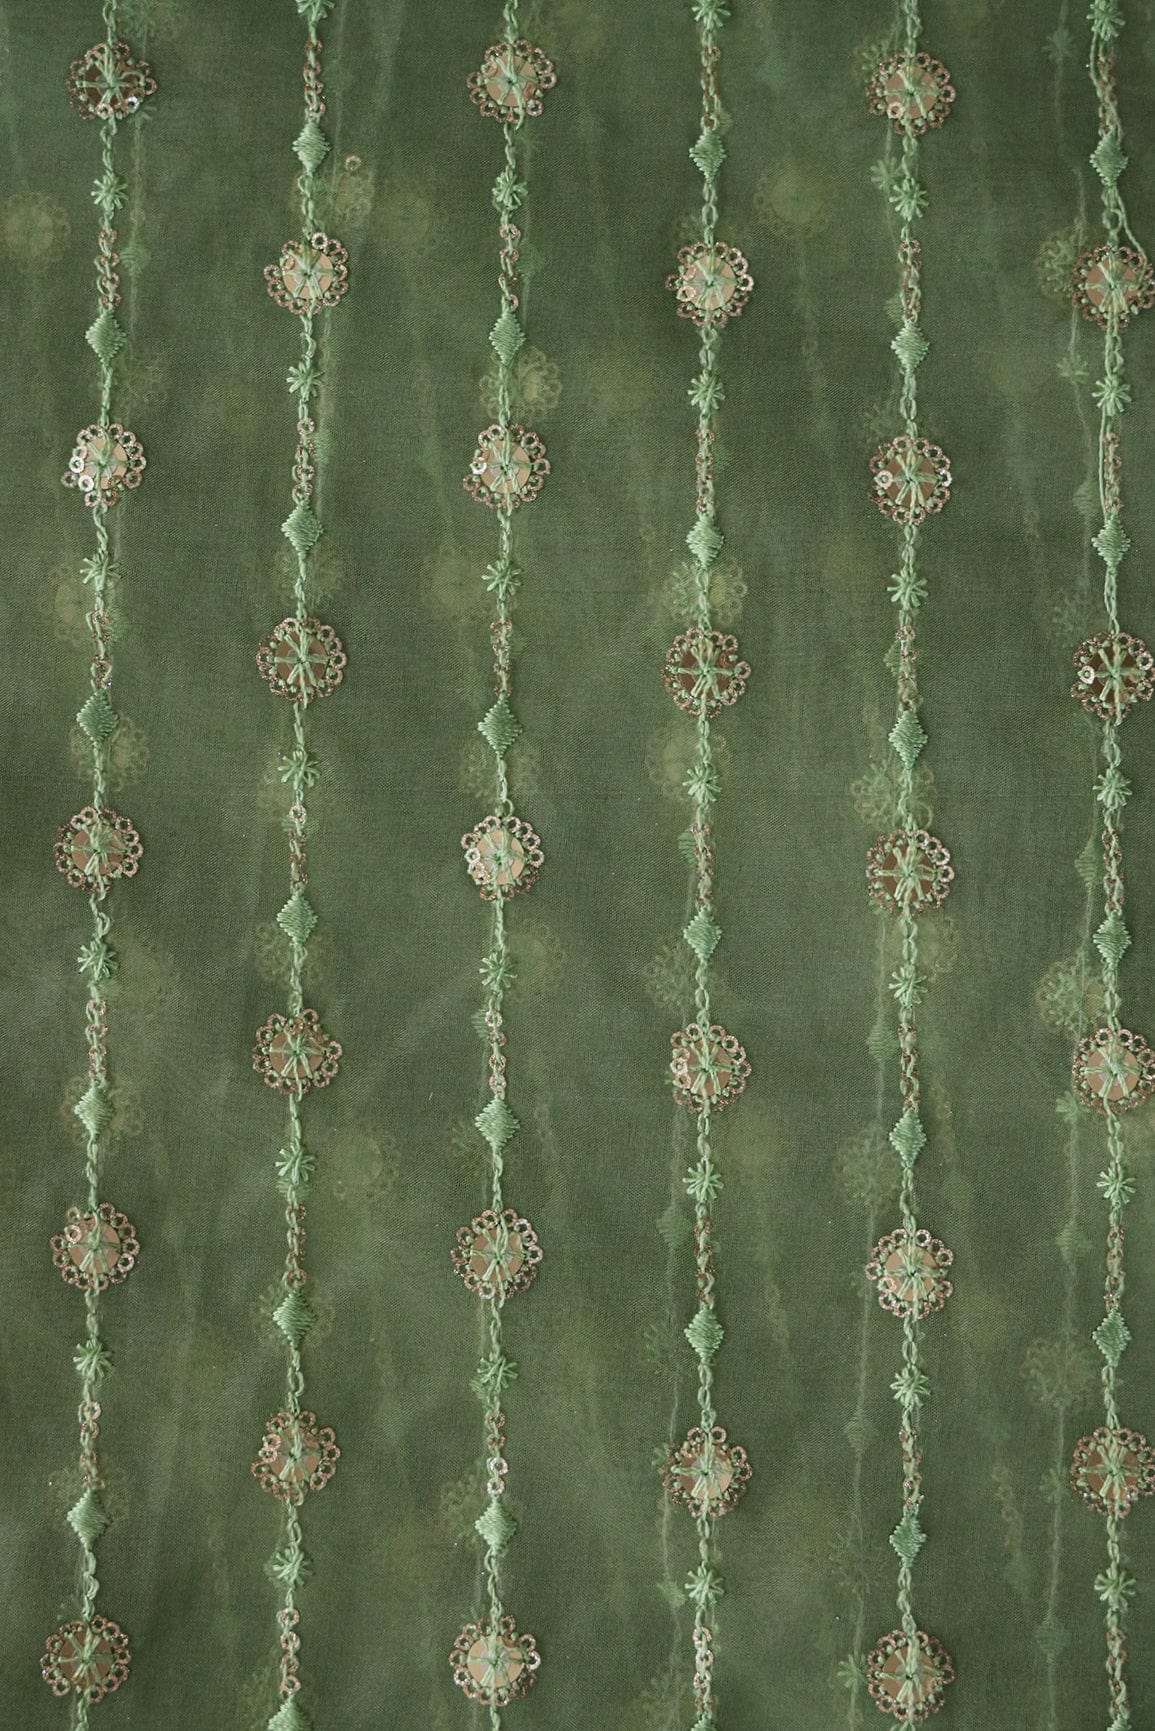 doeraa Embroidery Fabrics 1 Meter Cut Piece Of Gold Sequins With Thread Embroidery On Olive Green Organza Fabric